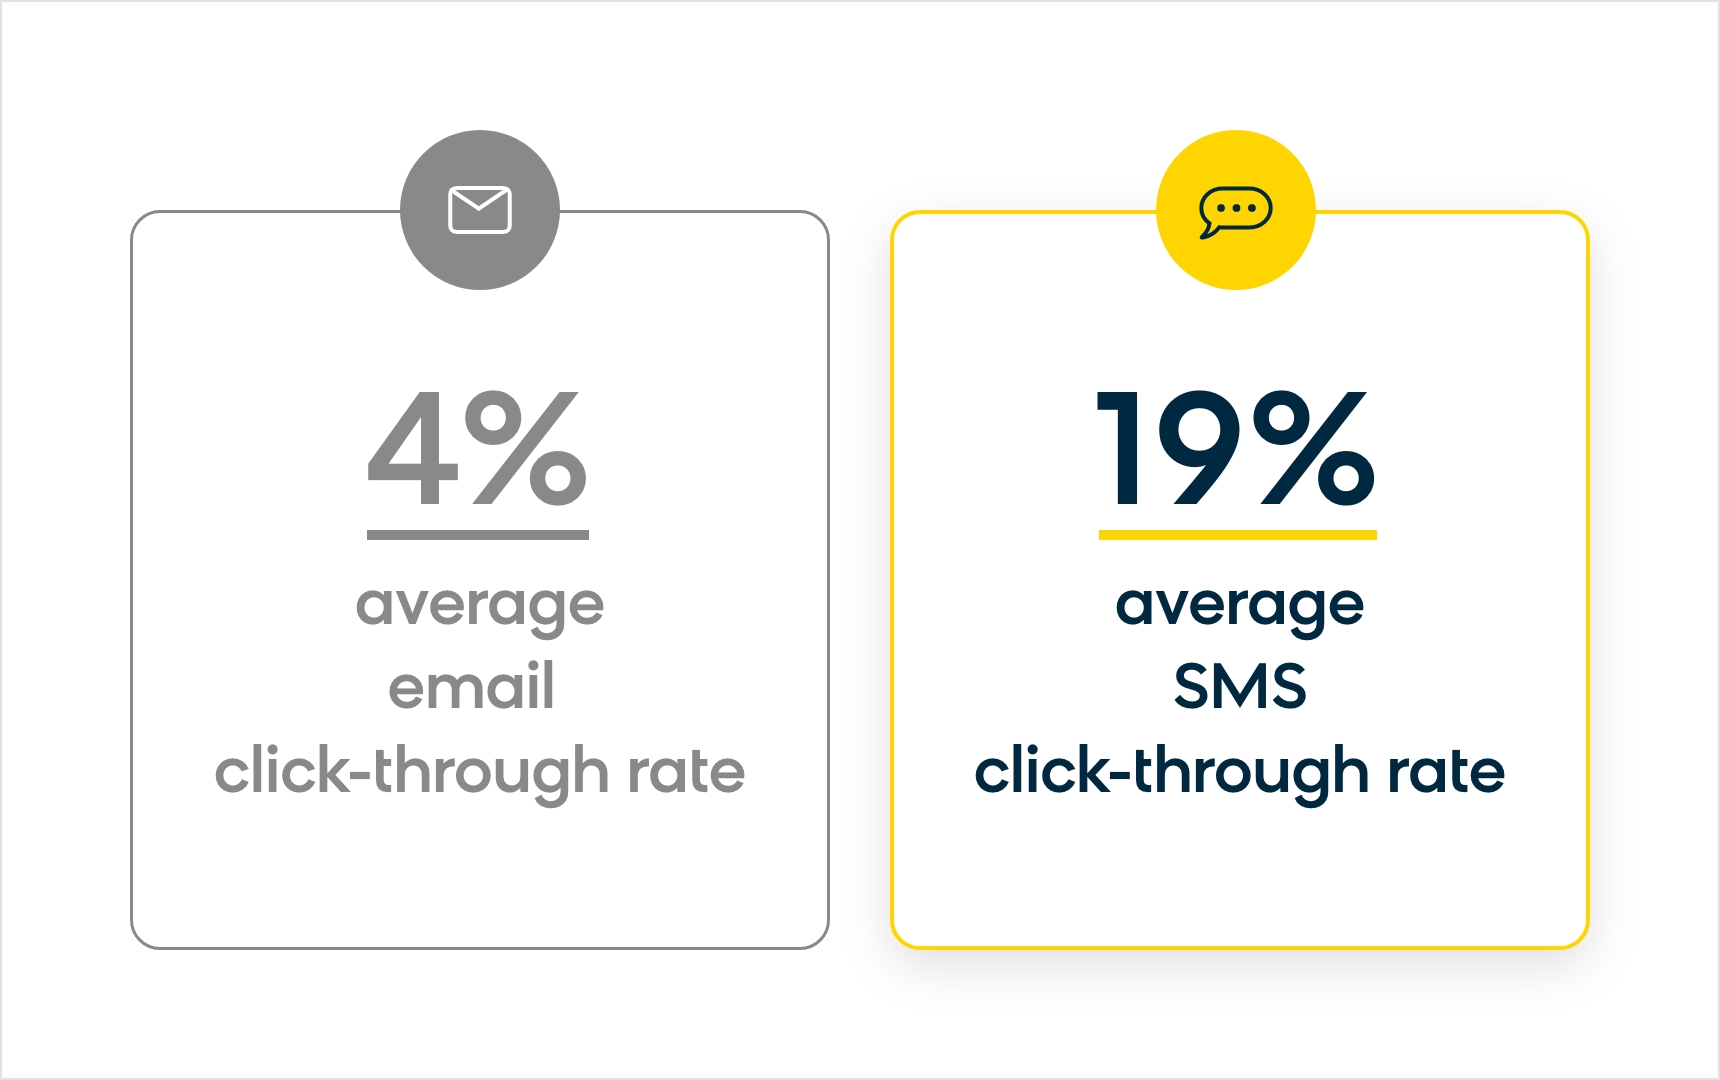 The average click-through rate for SMS campaigns is 19%, compared to 4% for email campaigns